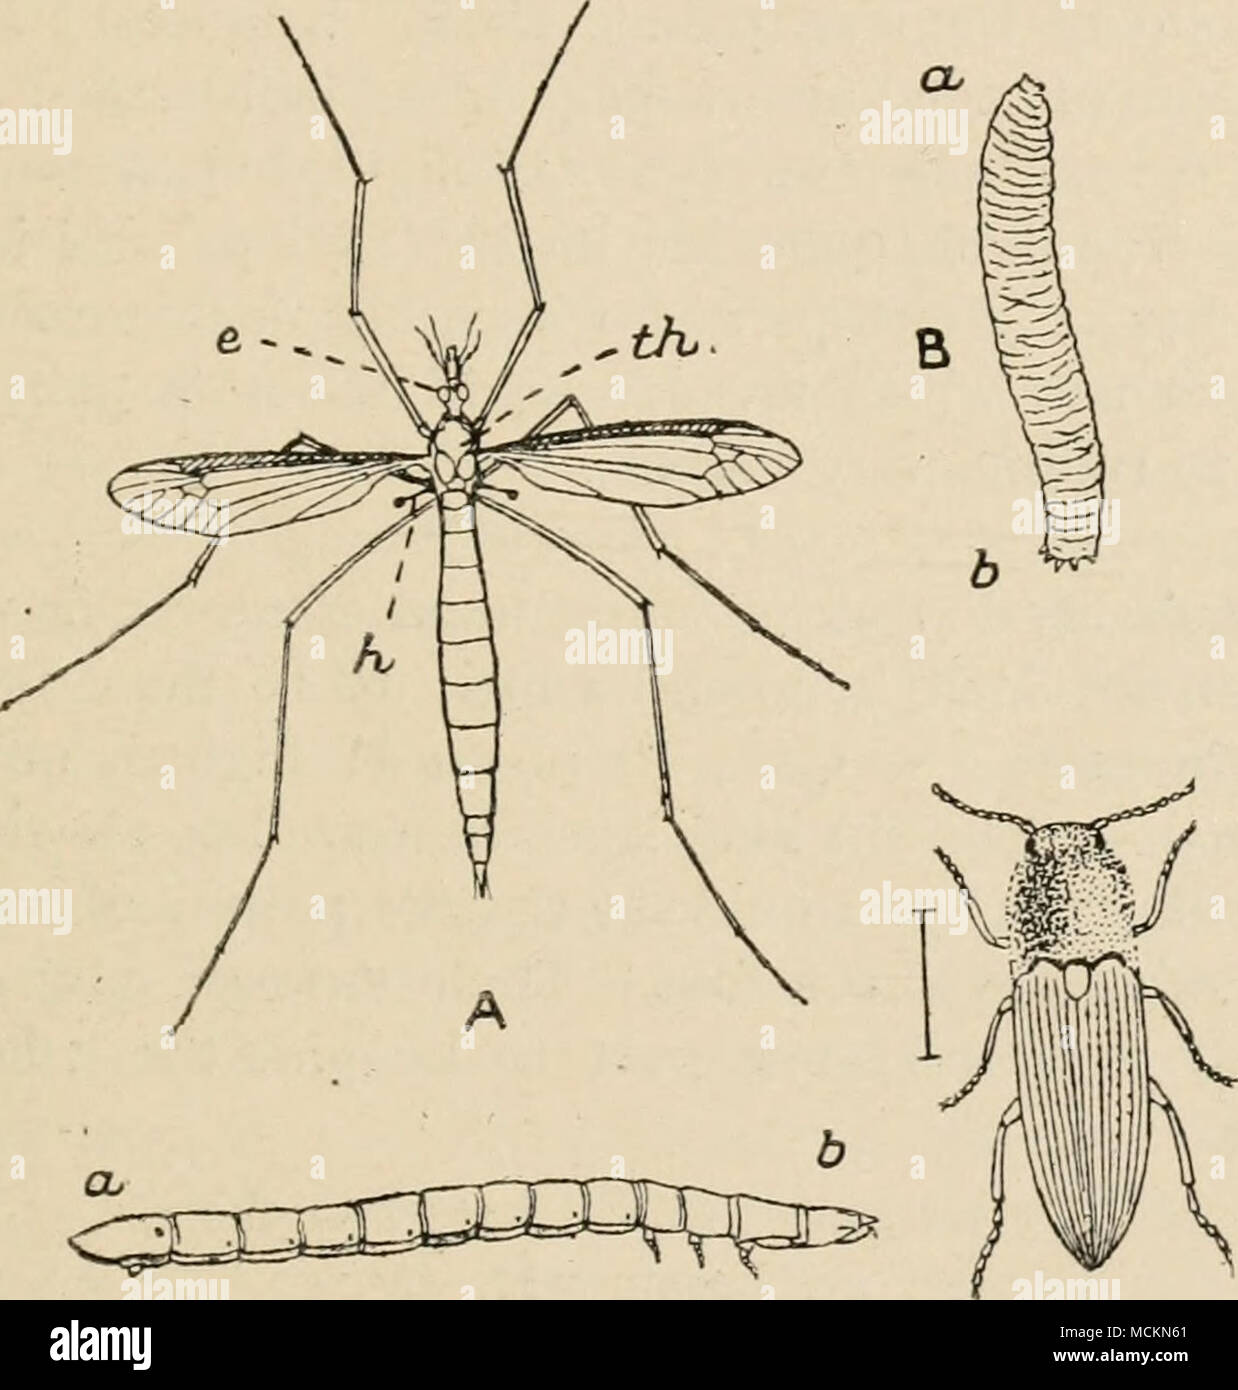 . D ^ Fig. 22. A, The Crane-fly (Daddy-Long-Legs), Tipula oleracea. e, the left eye ; /i, one of the balancers or &quot; halleres,&quot; which are the modified second pair of wings ; ^/i, the thorax. Natural size. B, The &quot;Leather-jacket,&quot; the grub of the crane-fly. a, head ; d, tail. Natural size. C, The Click-beetle or Skip-jack, Elater obscurus. The line beside it shows its natural size. D, The true Wire-worm or grub of the click-beetles. Enlarged to four times the natural length, a, tail ; d, head. difficult to see this dwindled pair of wings, which lie close behind the first or l Stock Photo